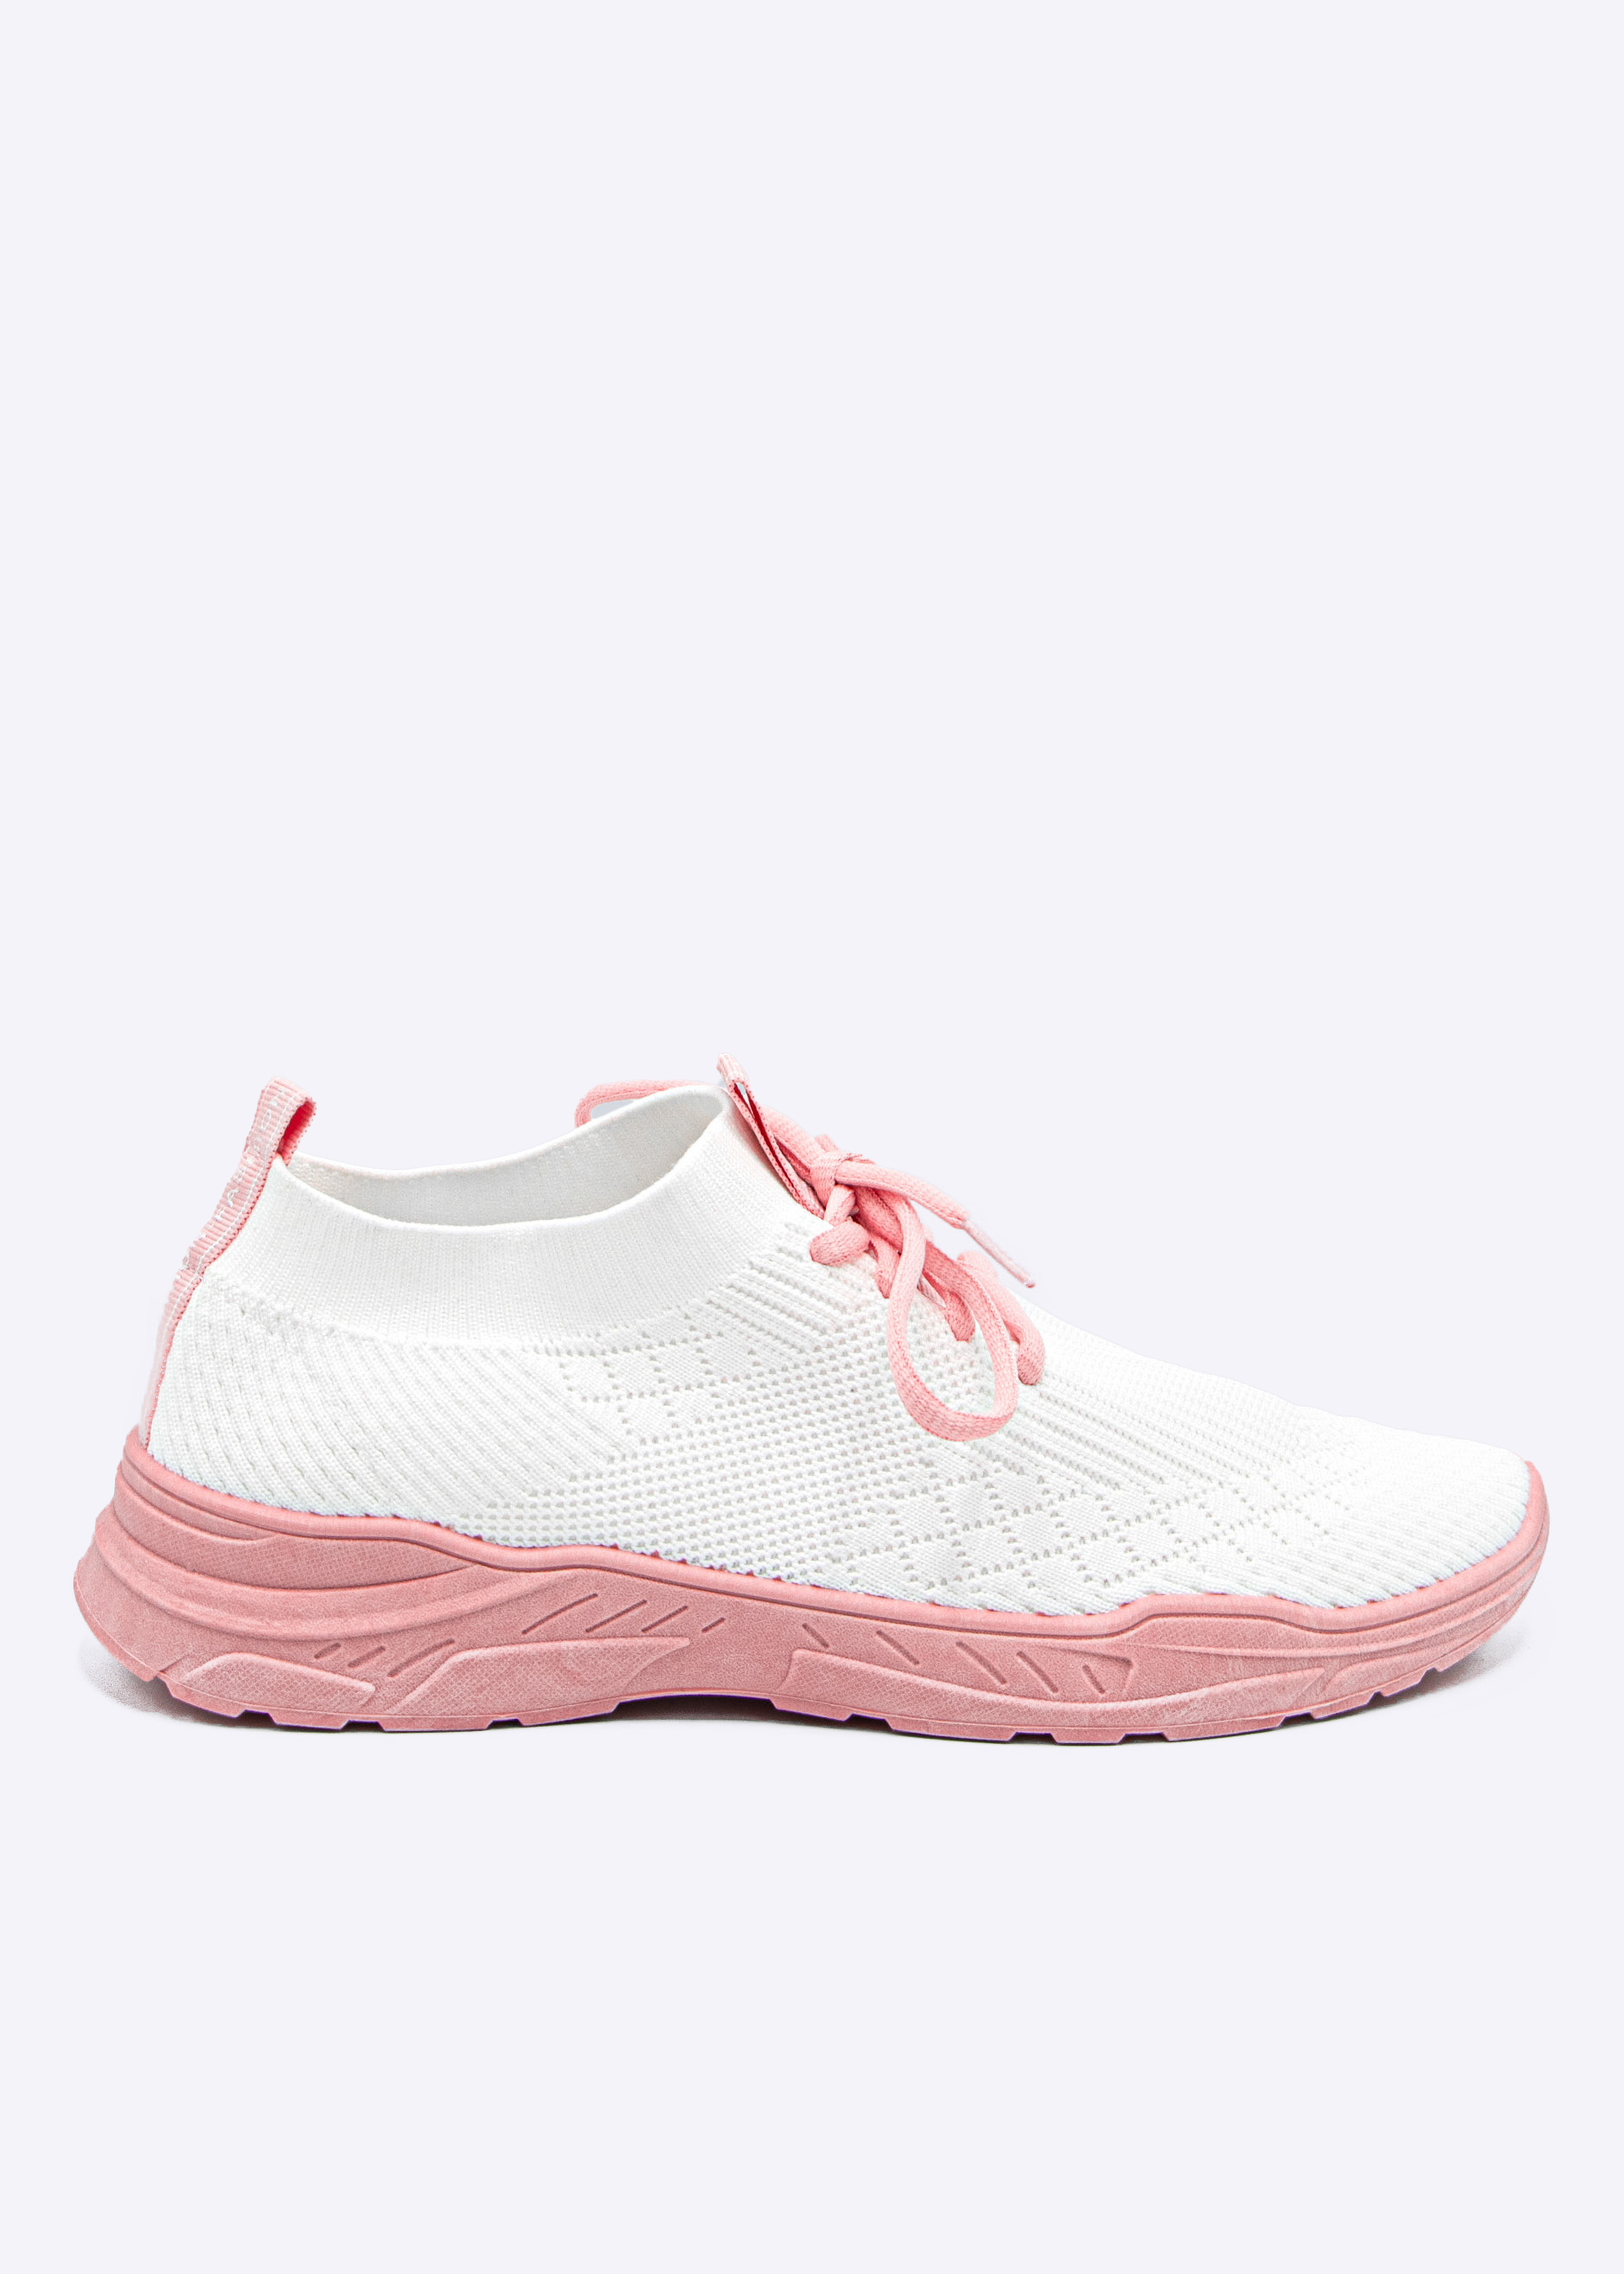 white nikes with pink soles